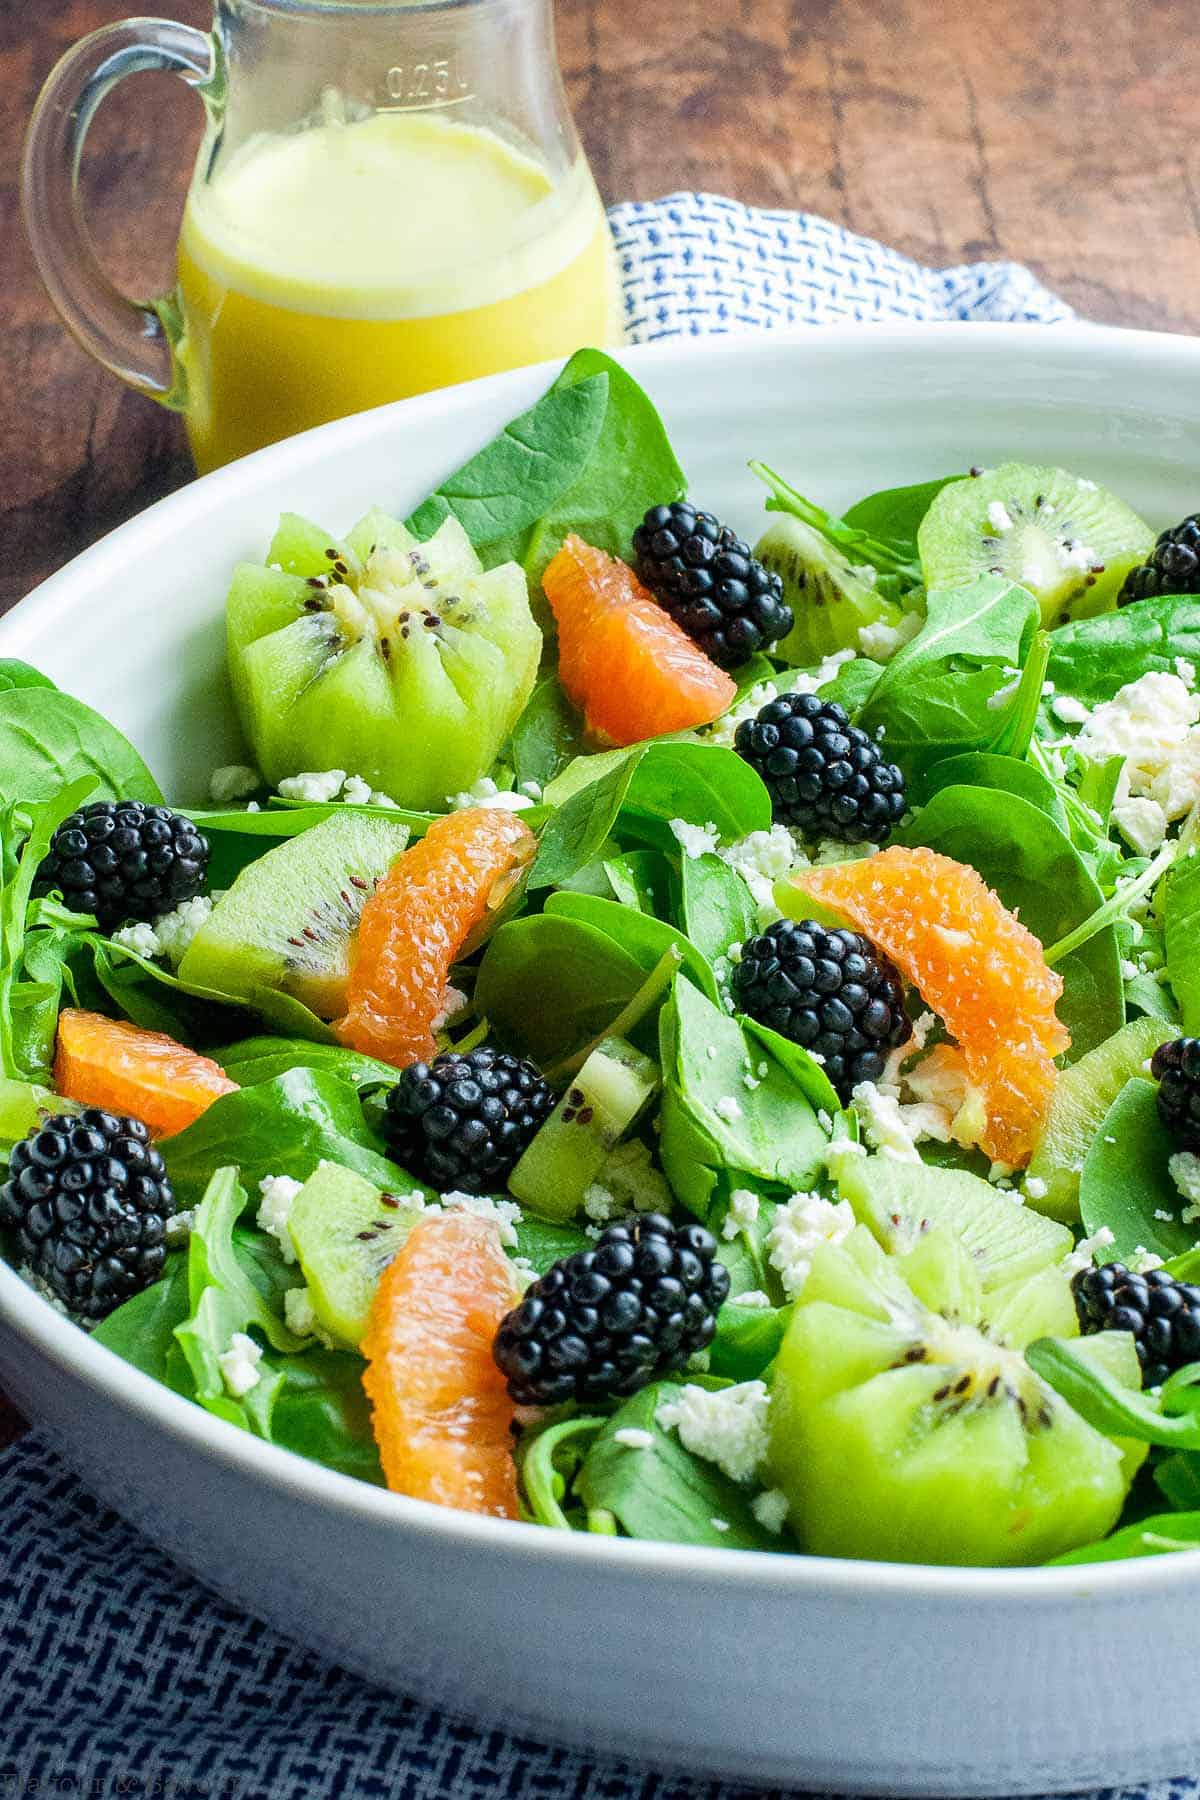 A salad of spinach and arugula leaves with kiwi fruit, blackberries, Cara Cara oranges and feta cheese